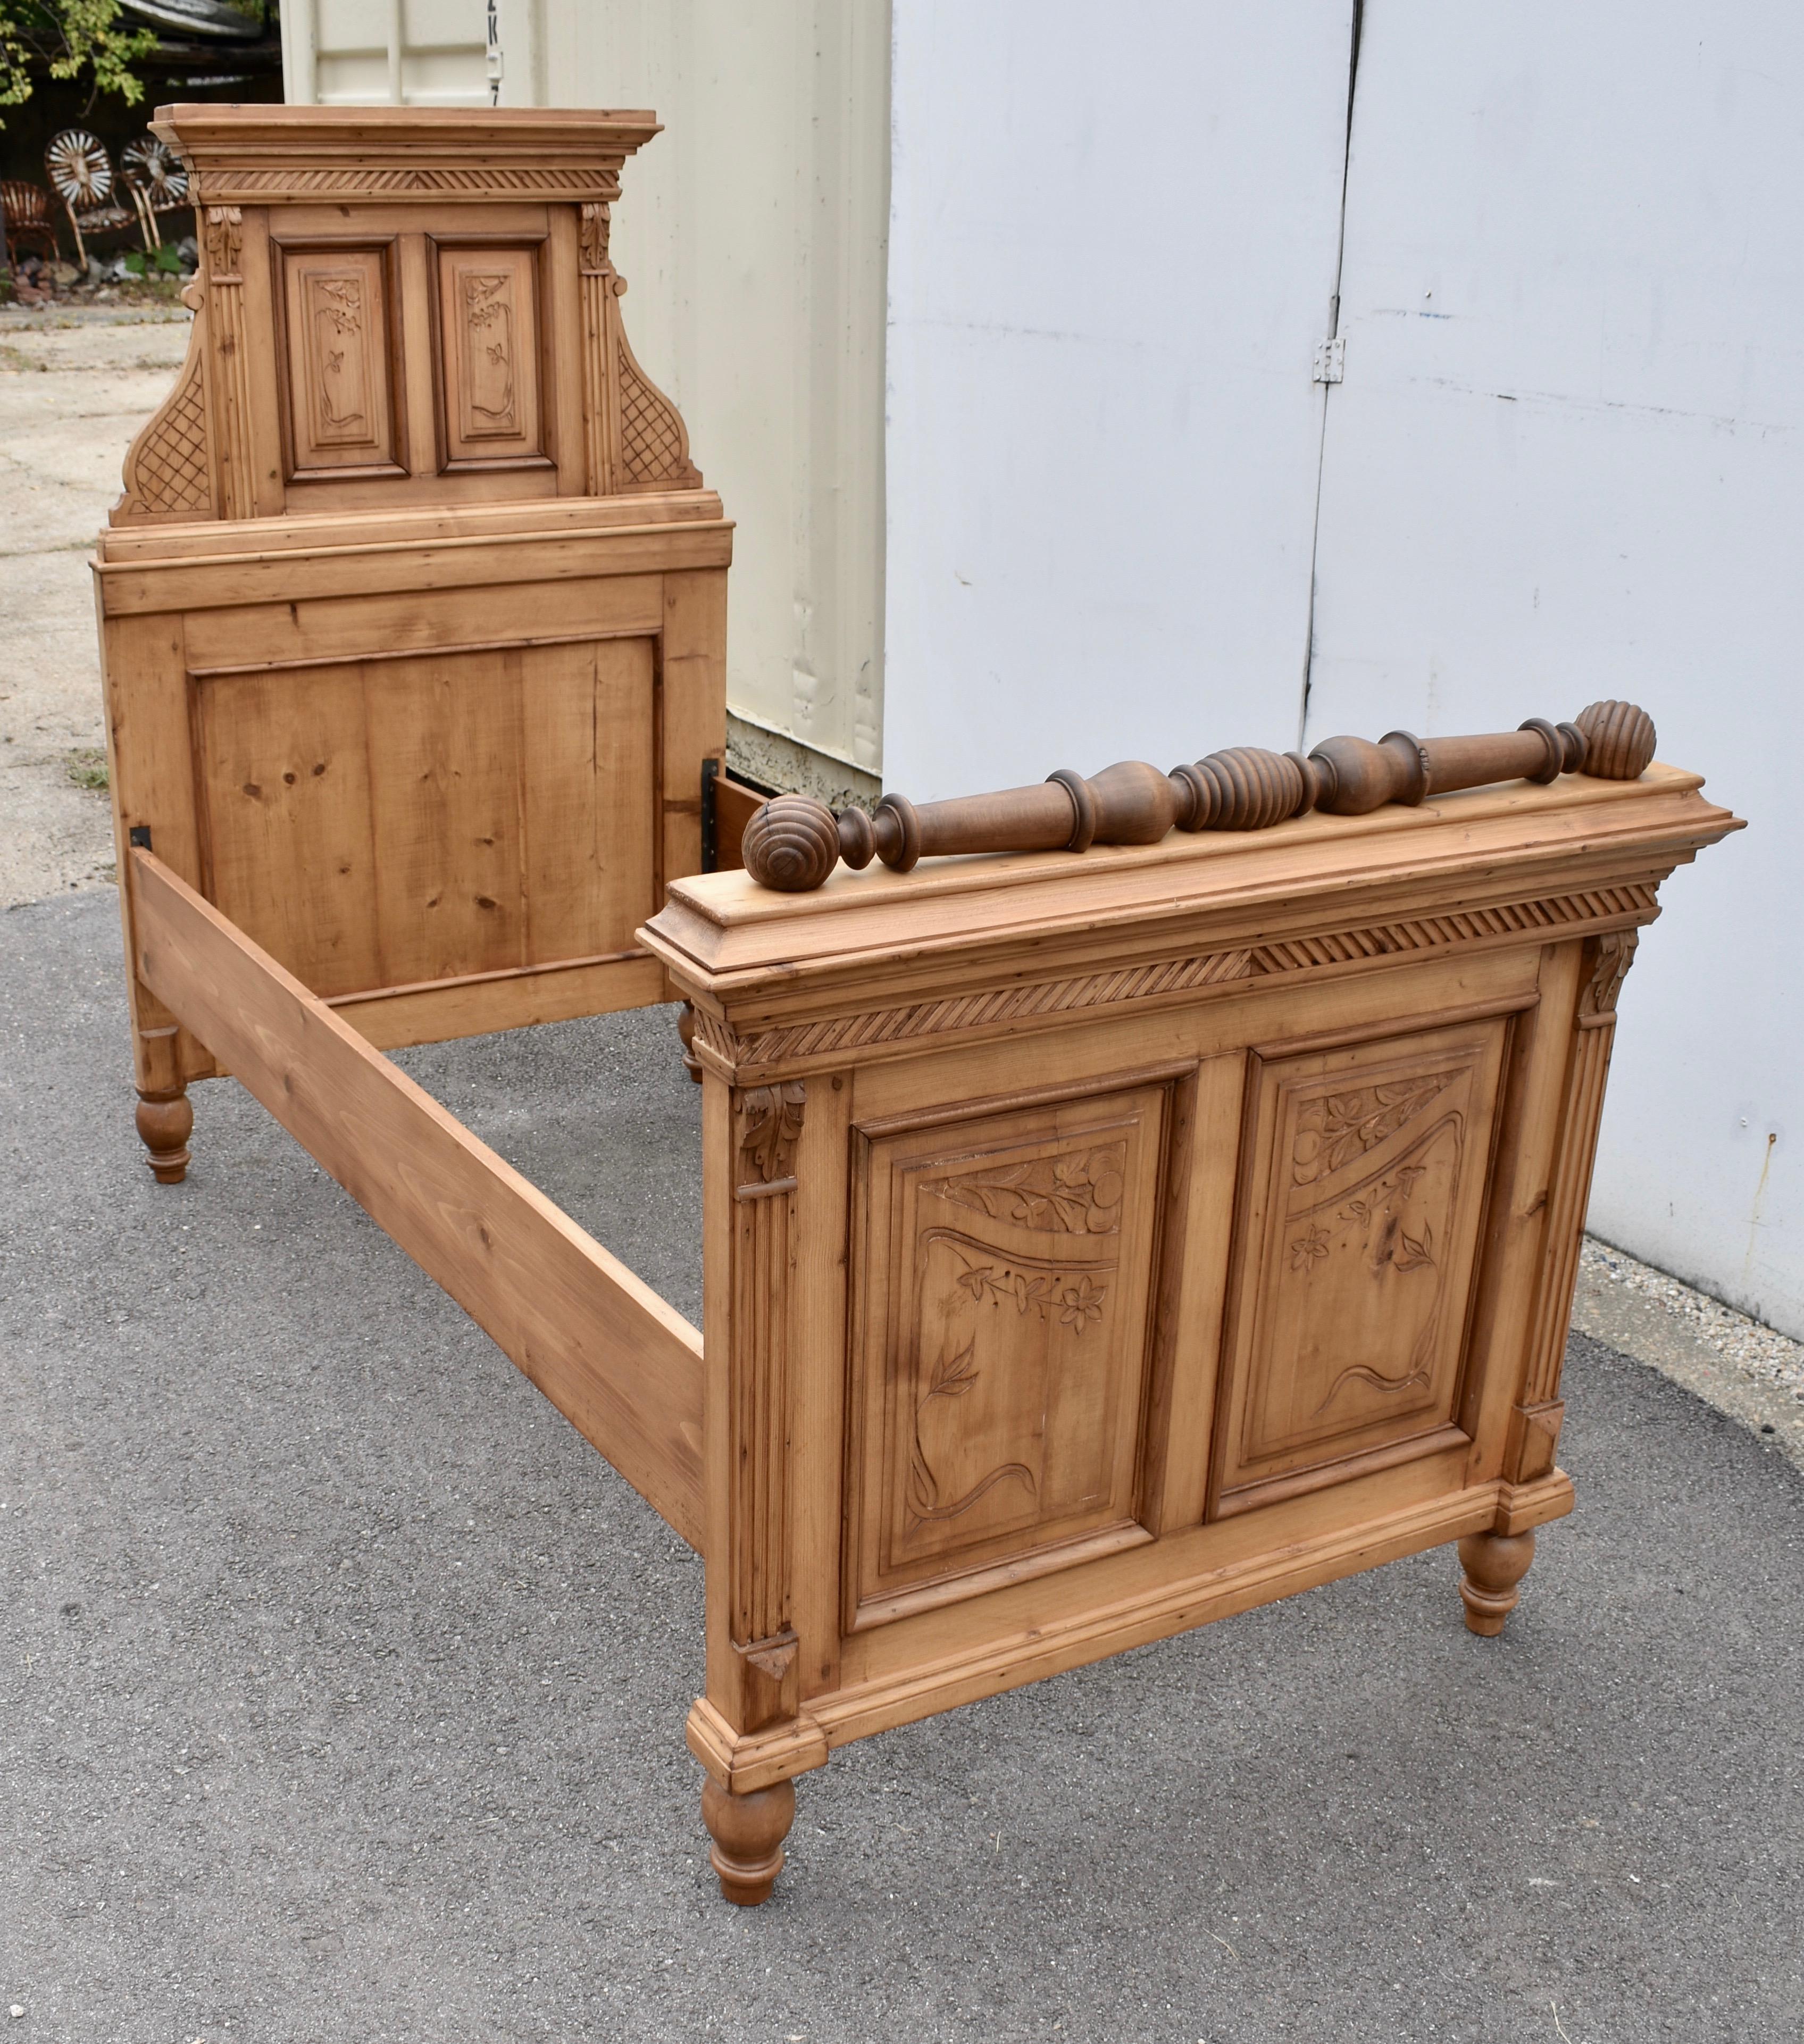 This fine Art Nouveau example is certainly one of the most decorative pine beds we have ever offered for sale.  The headboard is built in two parts.  The lower part consists of a flat panel, framed with thick rails and stiles and hardwood mullions